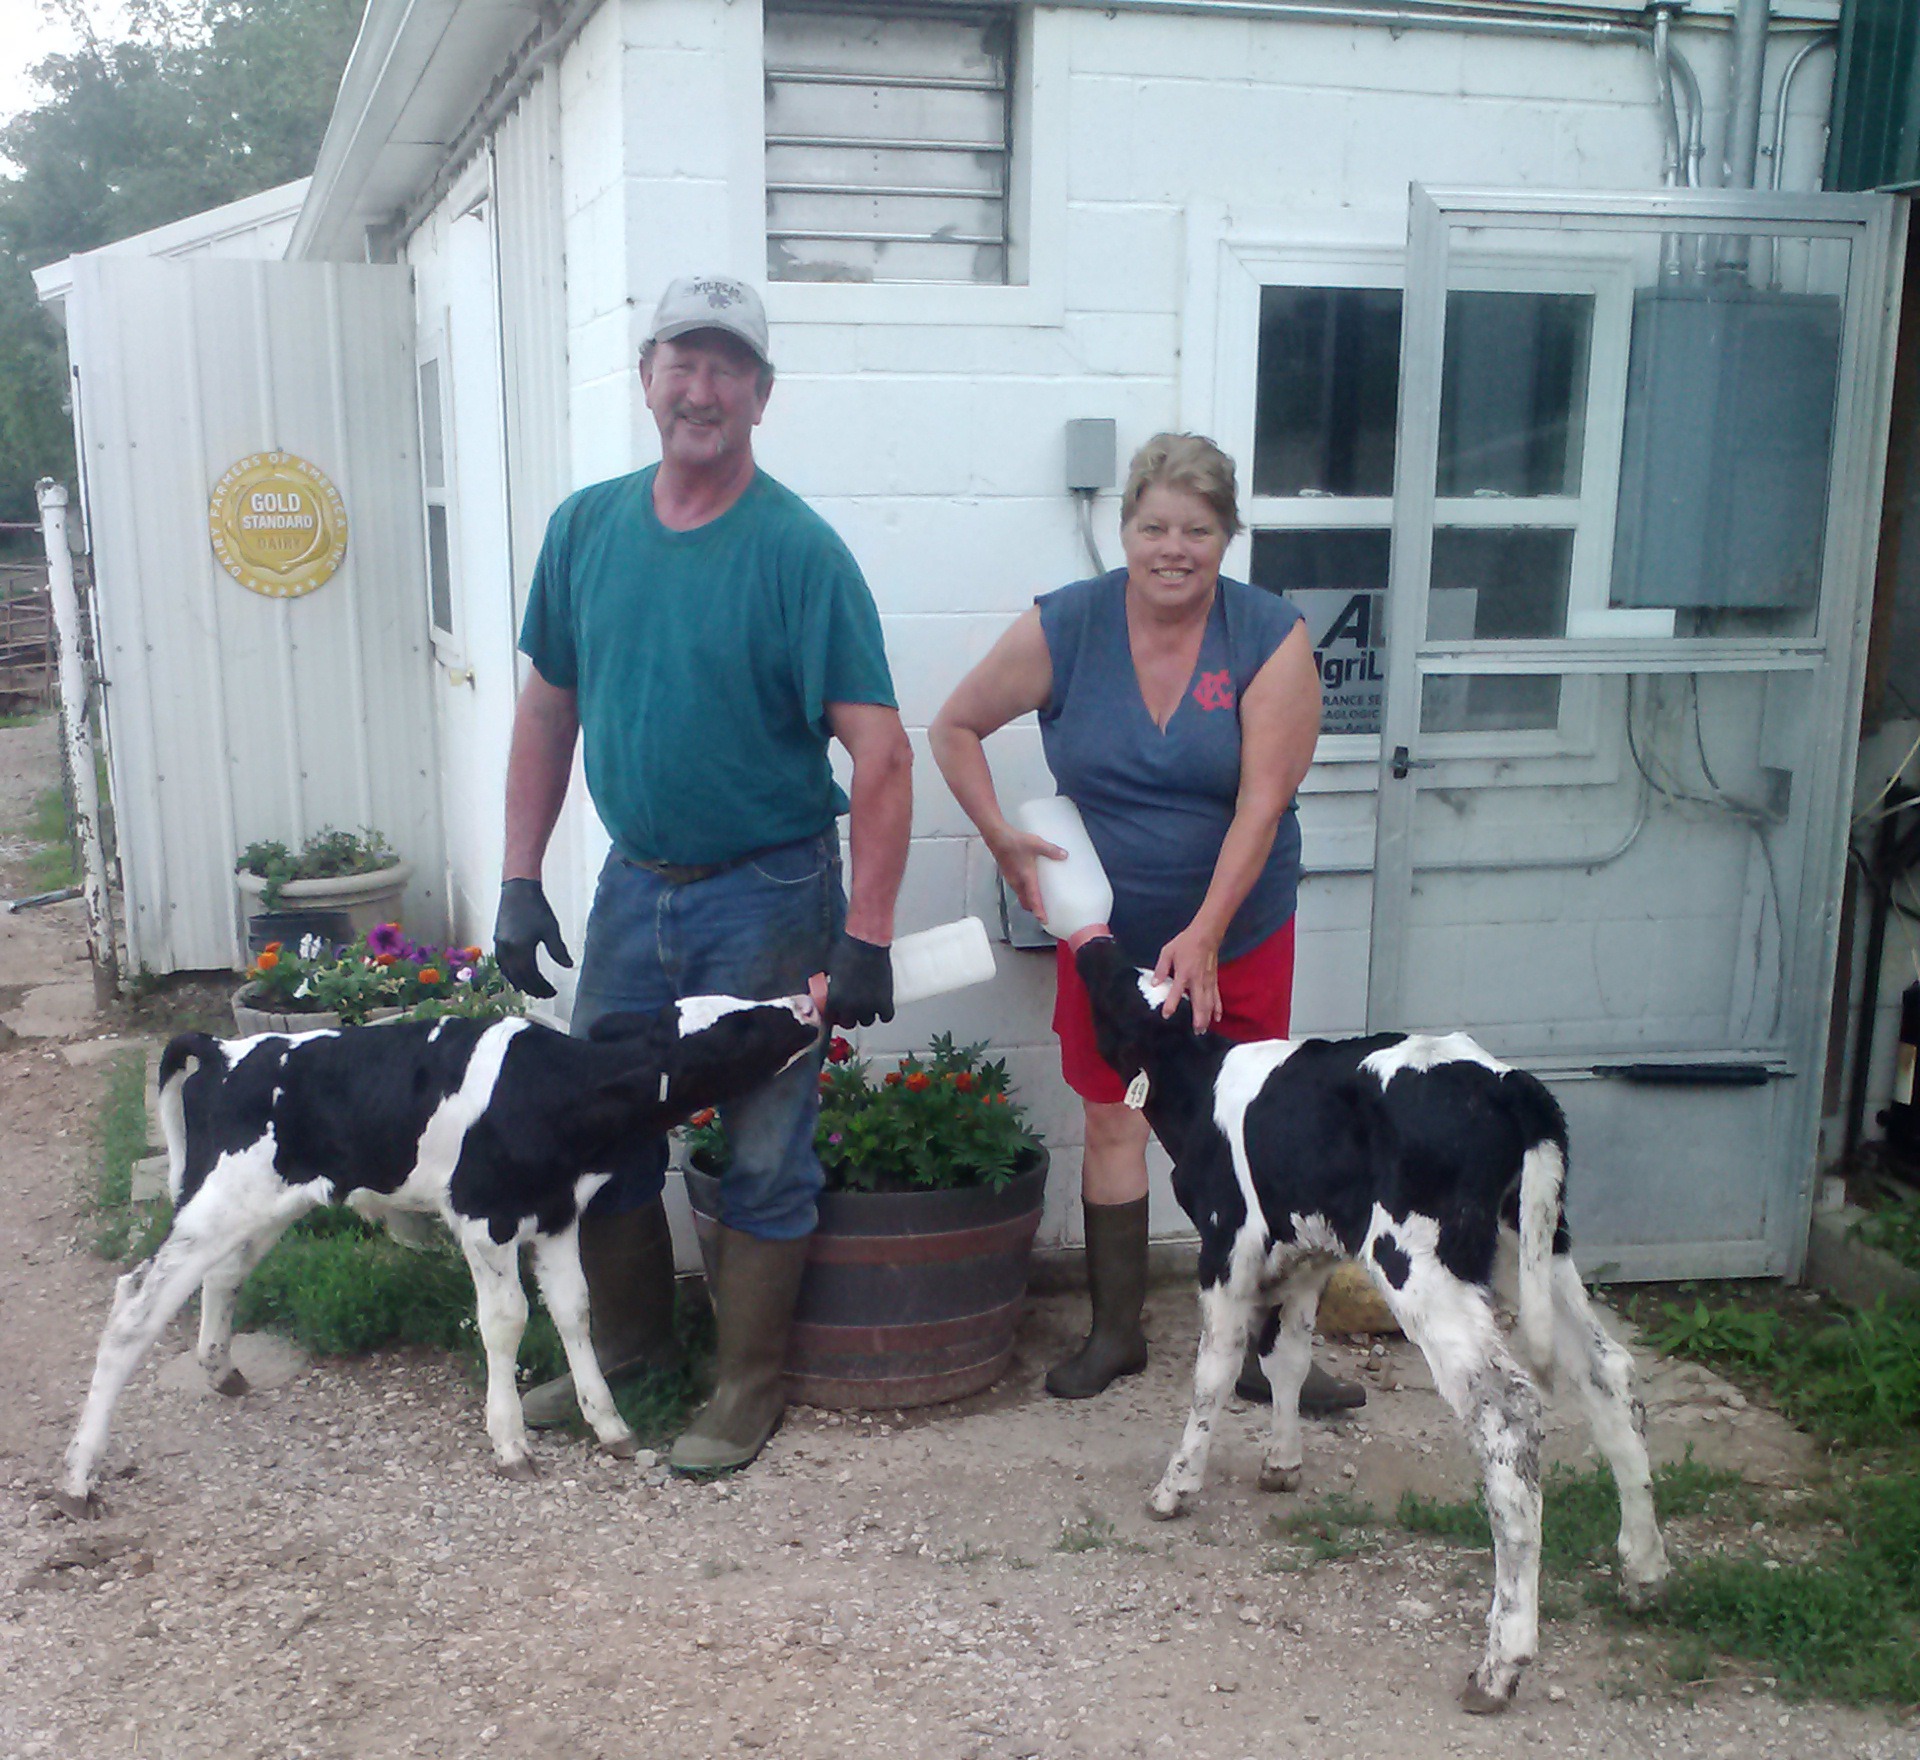 Strict Holstein cow production records assist Jim and Kathy Barr in selecting the right sires for artificial mating to produce superior quality replacement heifers for expanding milk output at the grade-A Barr Dairy near Lebo.